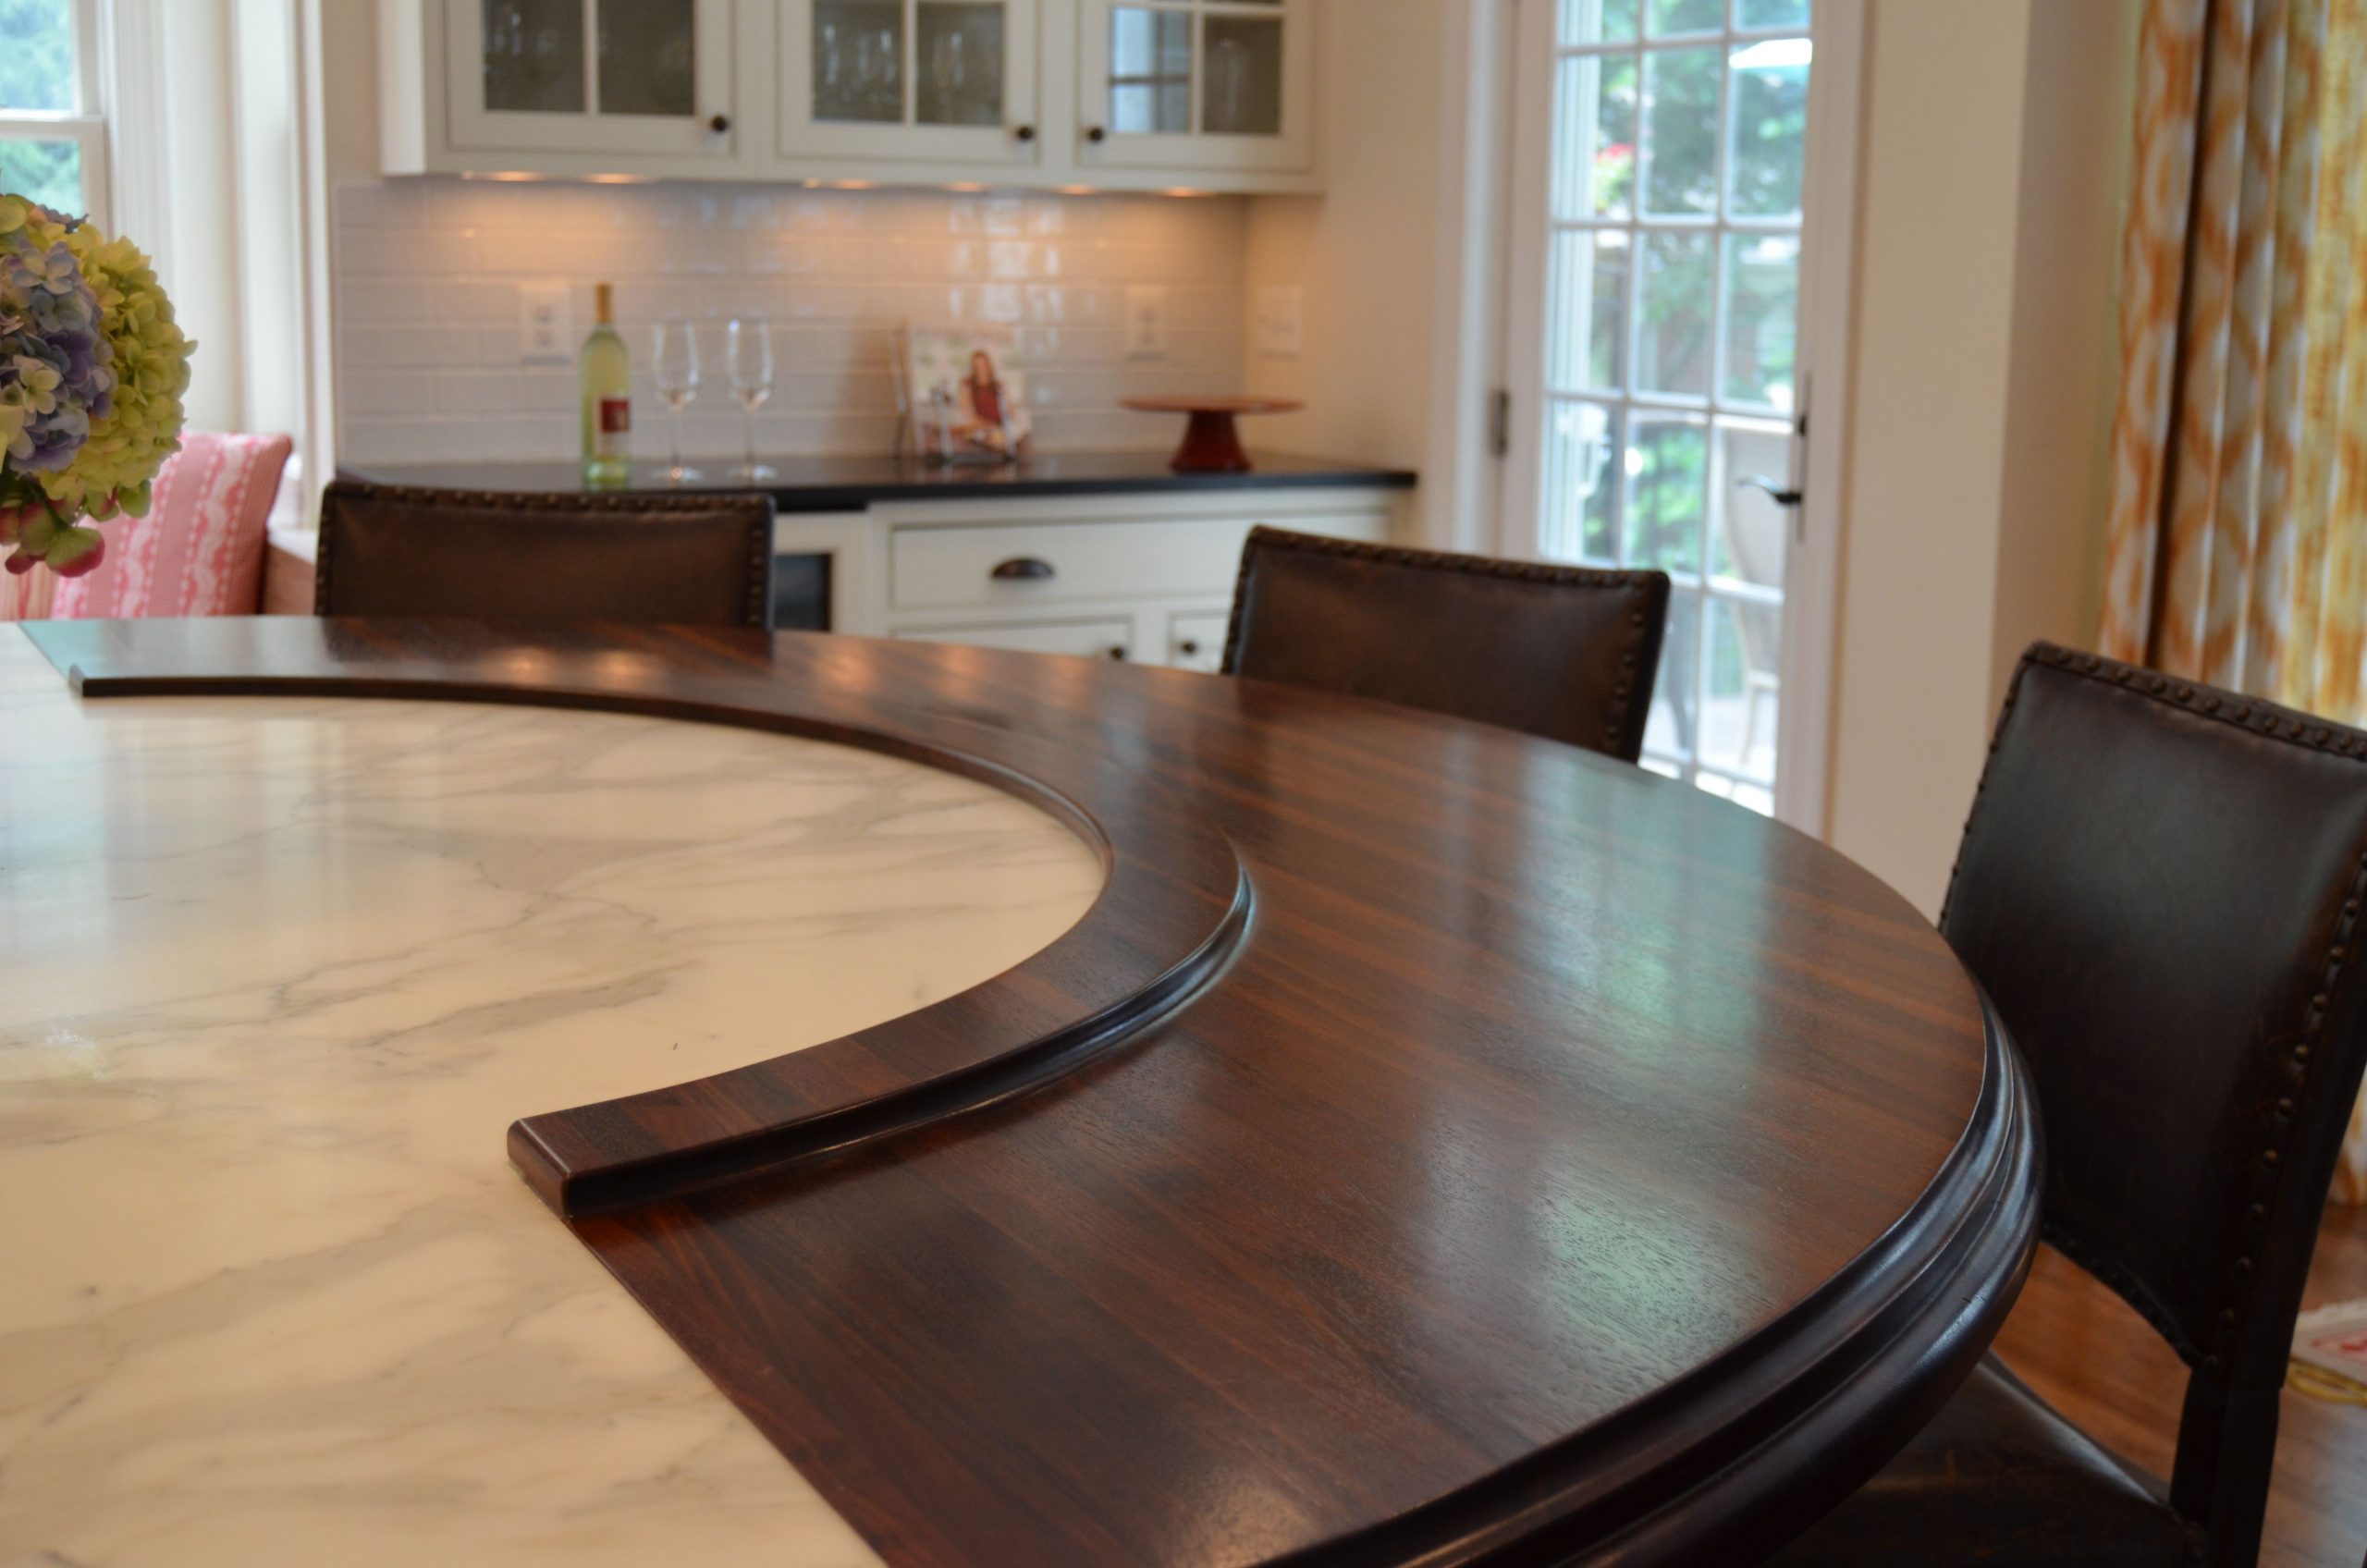 Walnut eating surface, and carrera marble worksurface make for an elegant wine tasting space while the hostess prepares dinner.